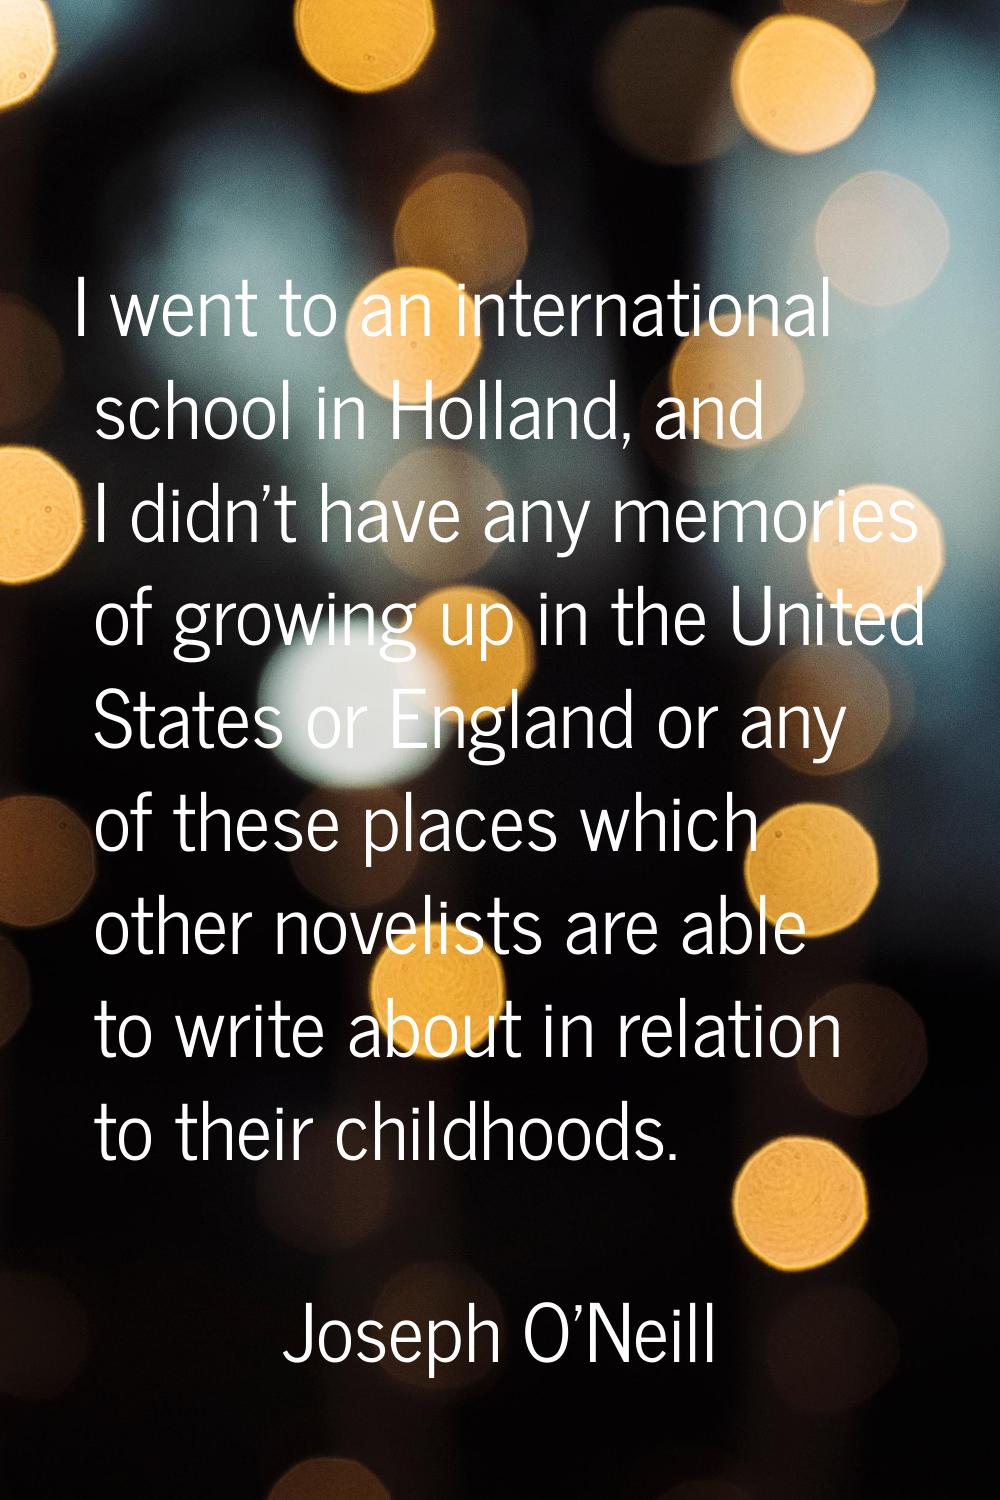 I went to an international school in Holland, and I didn't have any memories of growing up in the U